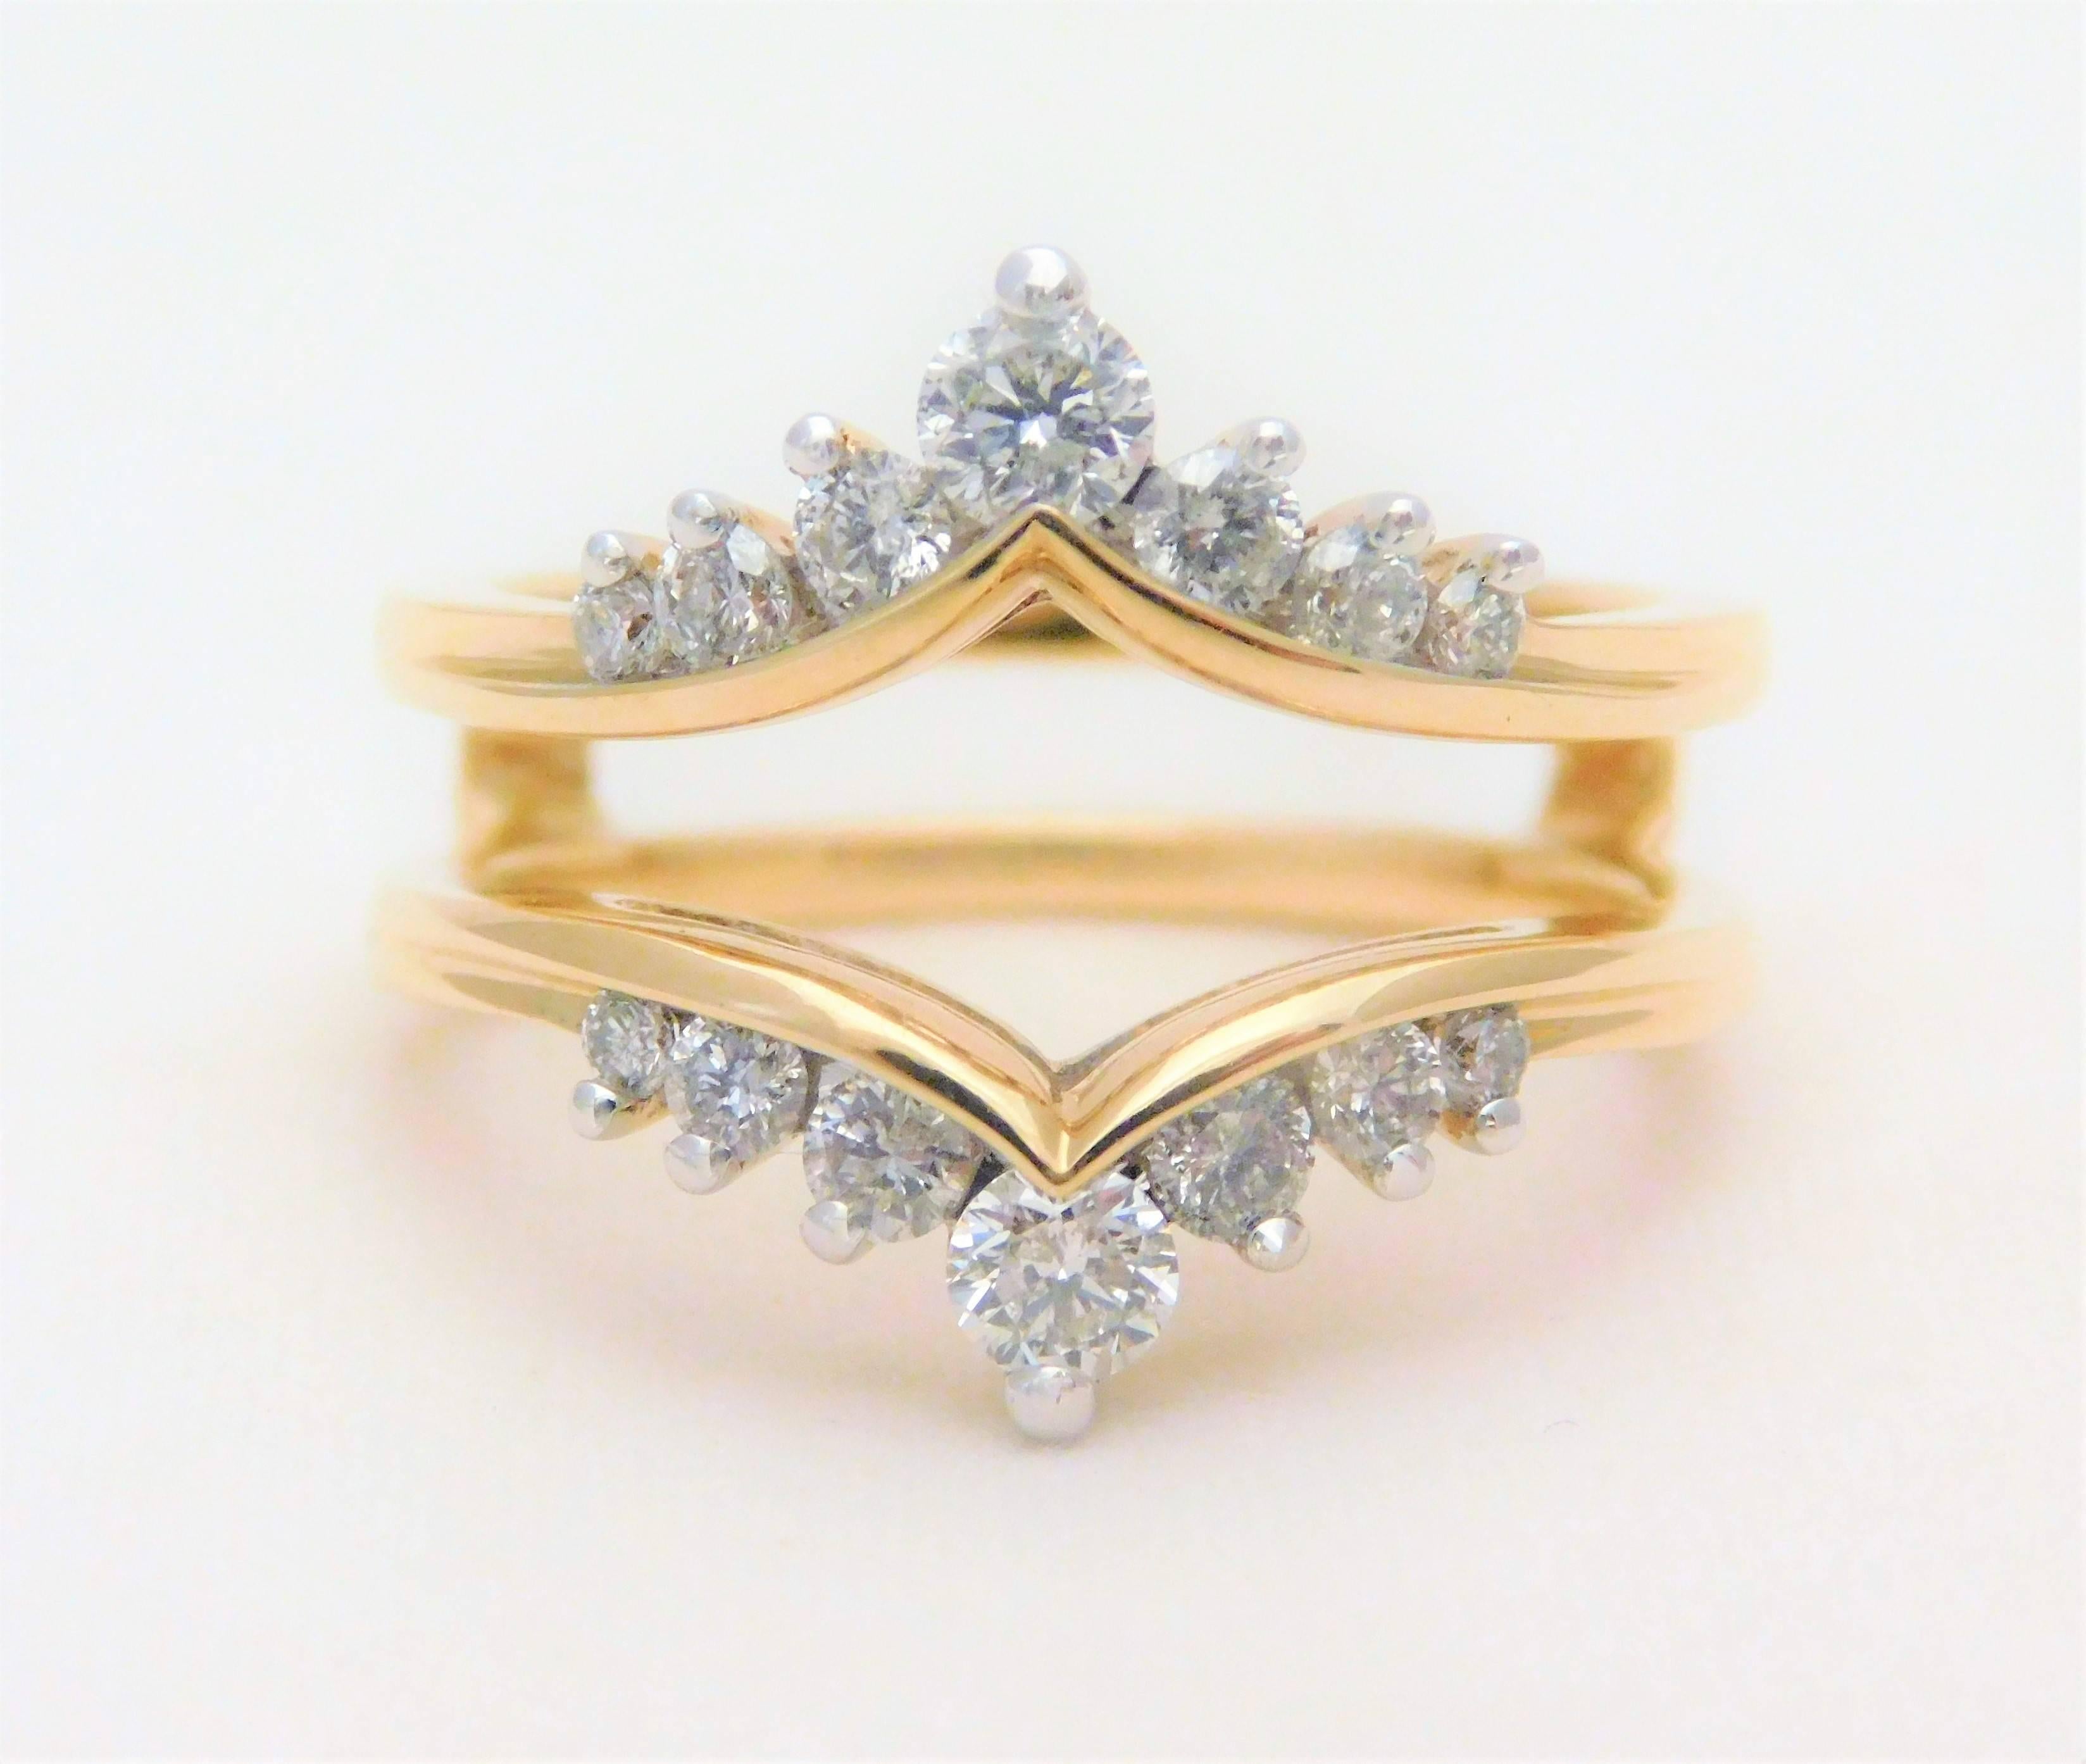 From a Southern estate.  Circa 1960.  This Unique vintage wrap ring enhancer has been crafted in solid 14k yellow gold.  It has been masterfully jeweled with 14 round brilliant-cut diamonds approximating 0.75ct in total carat weight.  The vintage